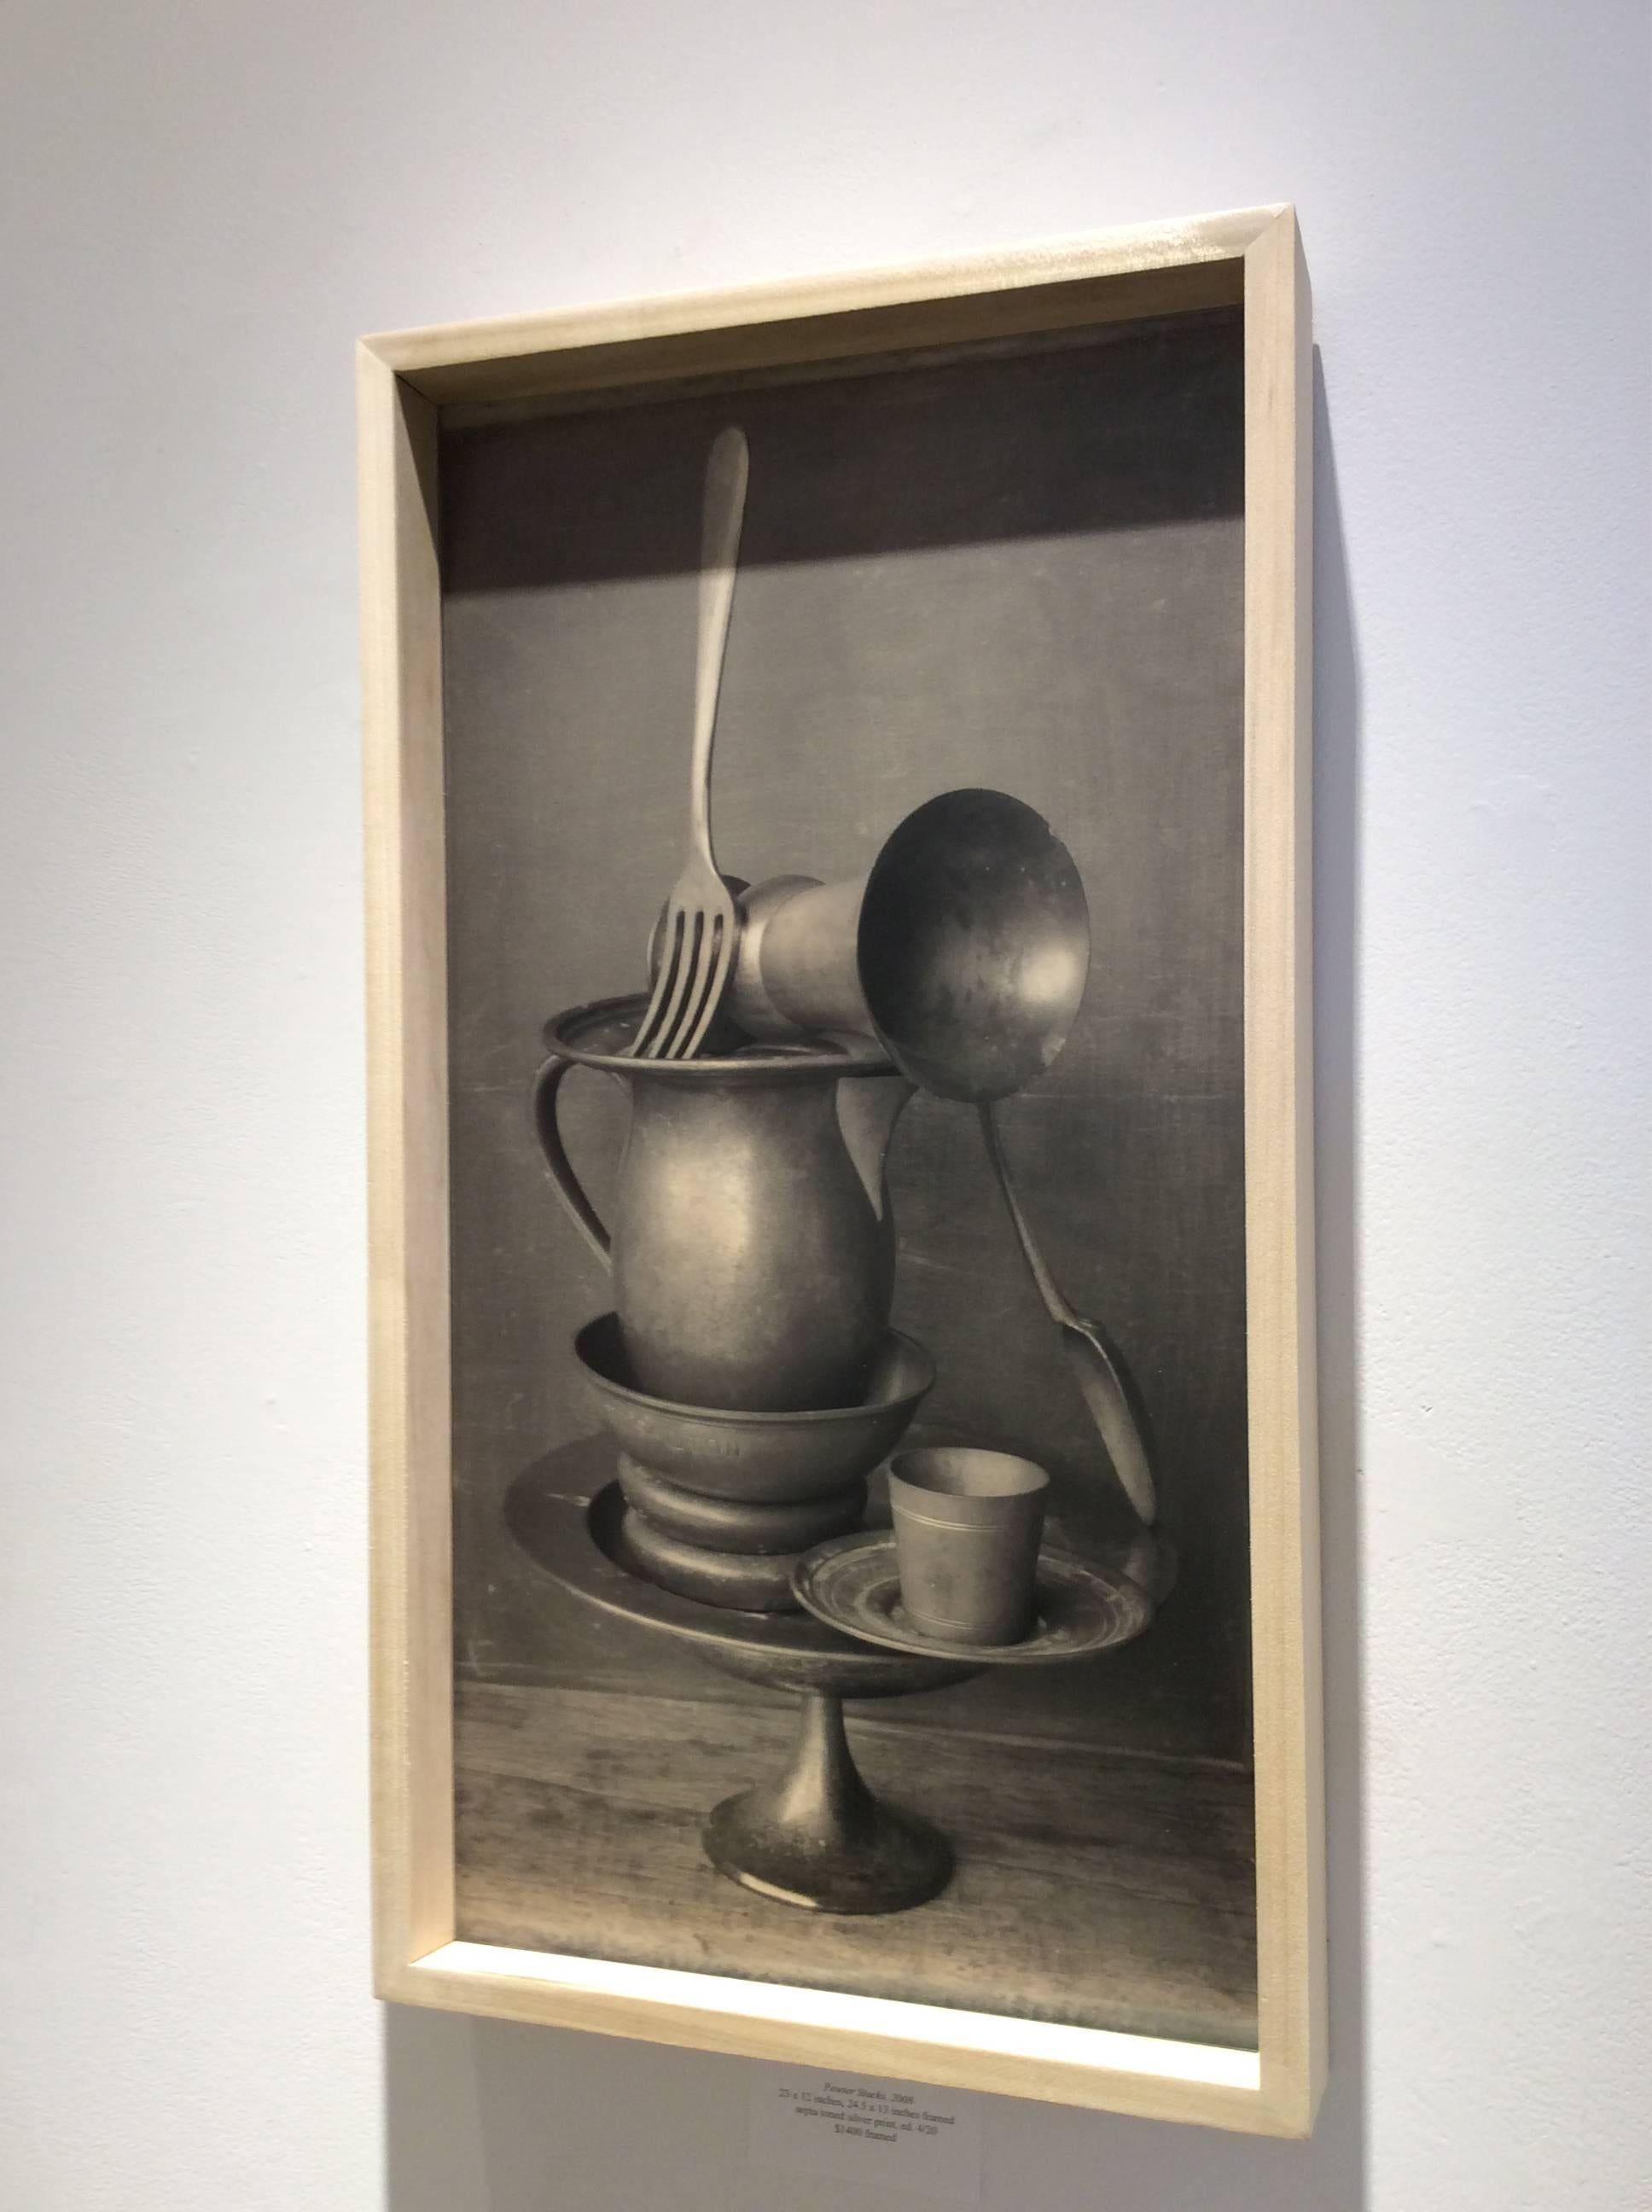 Pewter Stack (Vintage, Vertical Sepia Toned Print of Silver Pewter Dishware)  - Photograph by David Halliday